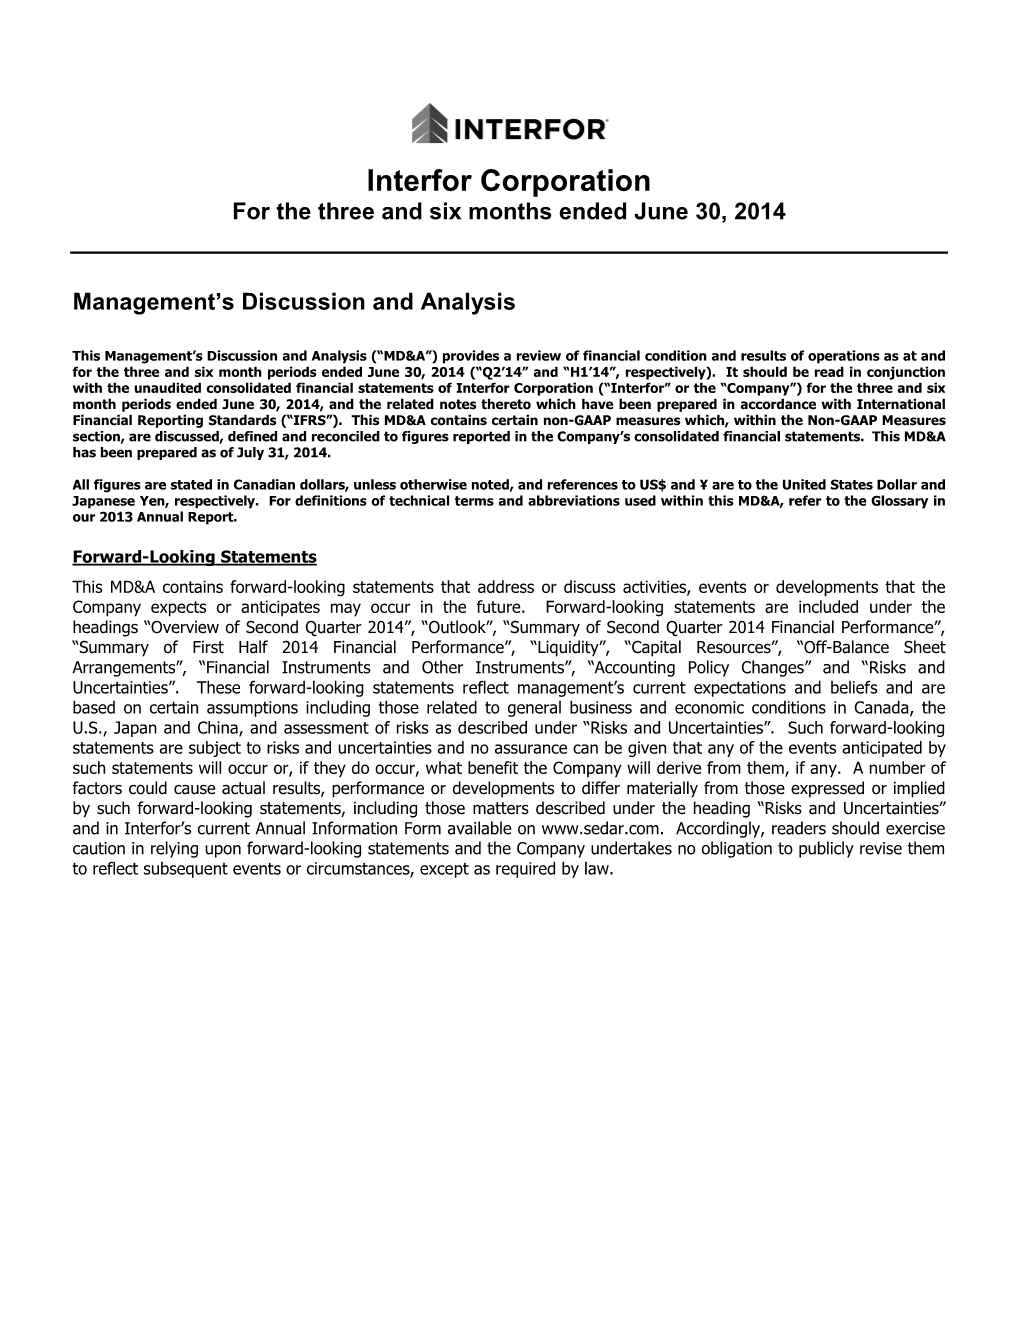 Interfor Corporation for the Three and Six Months Ended June 30, 2014